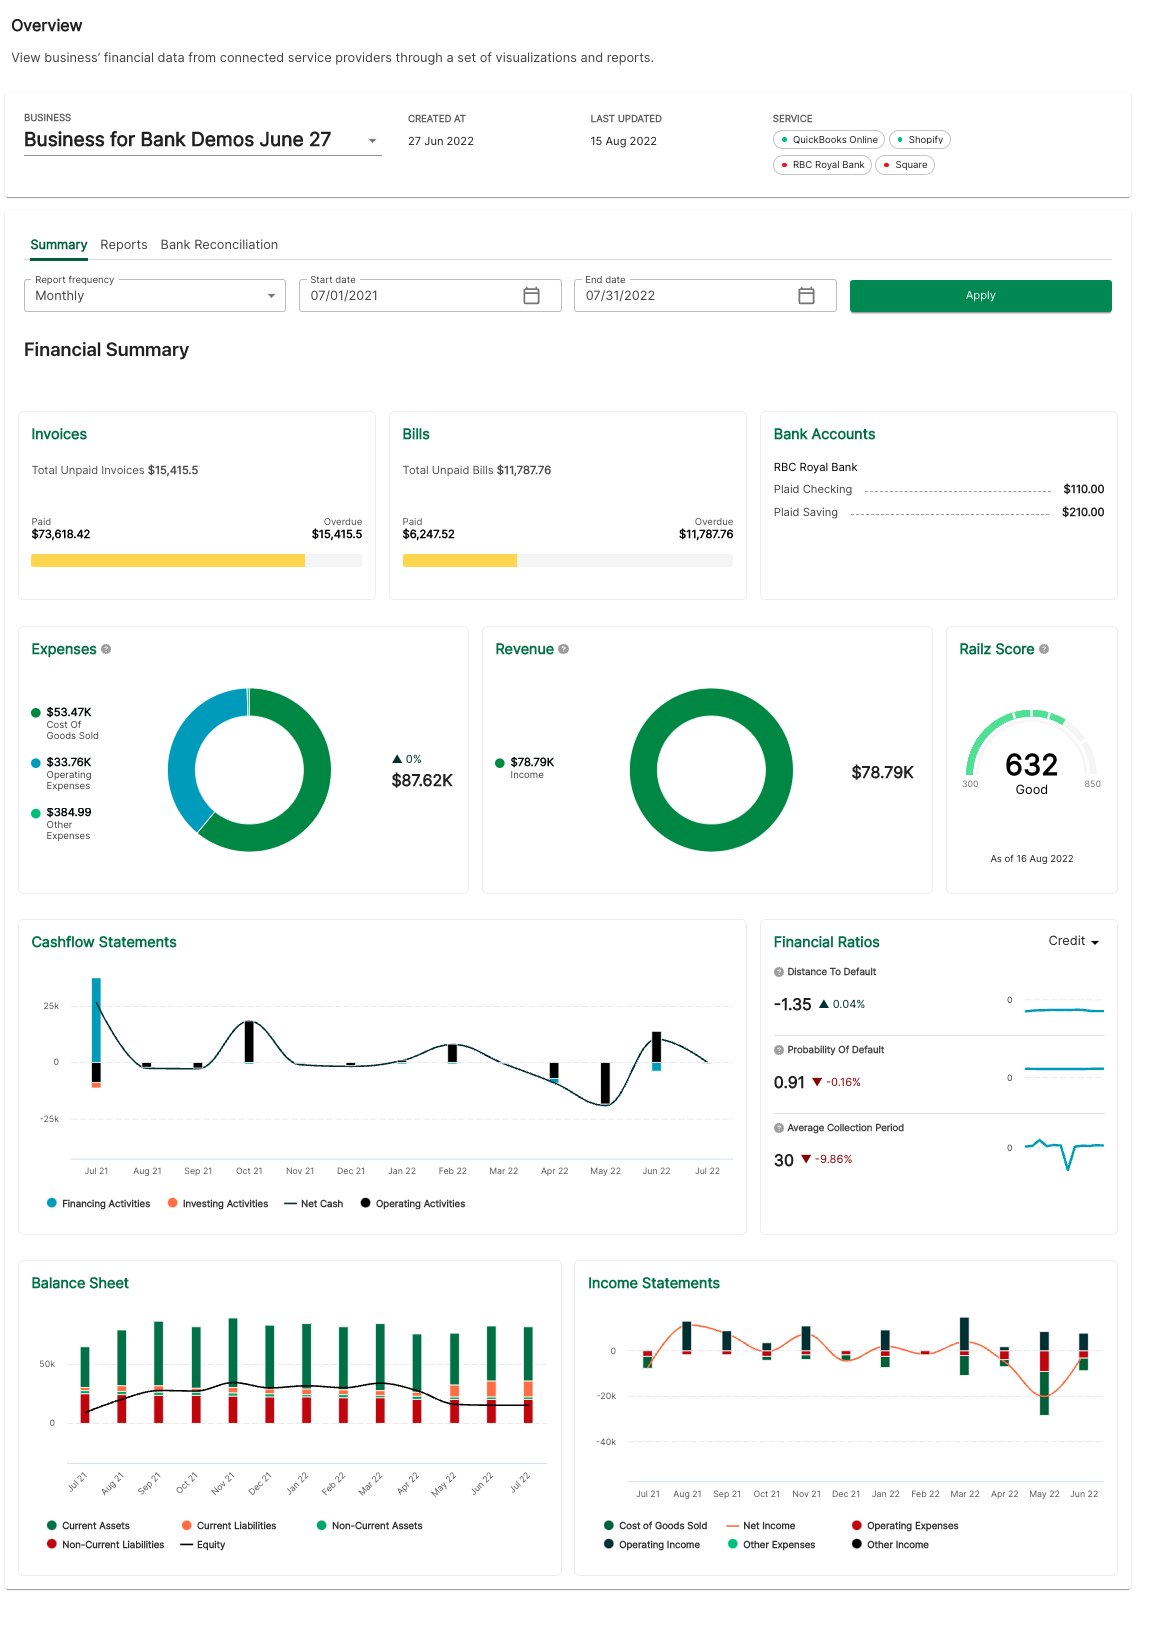 Railz Dashboard - View Financial Summary. Click to Expand.